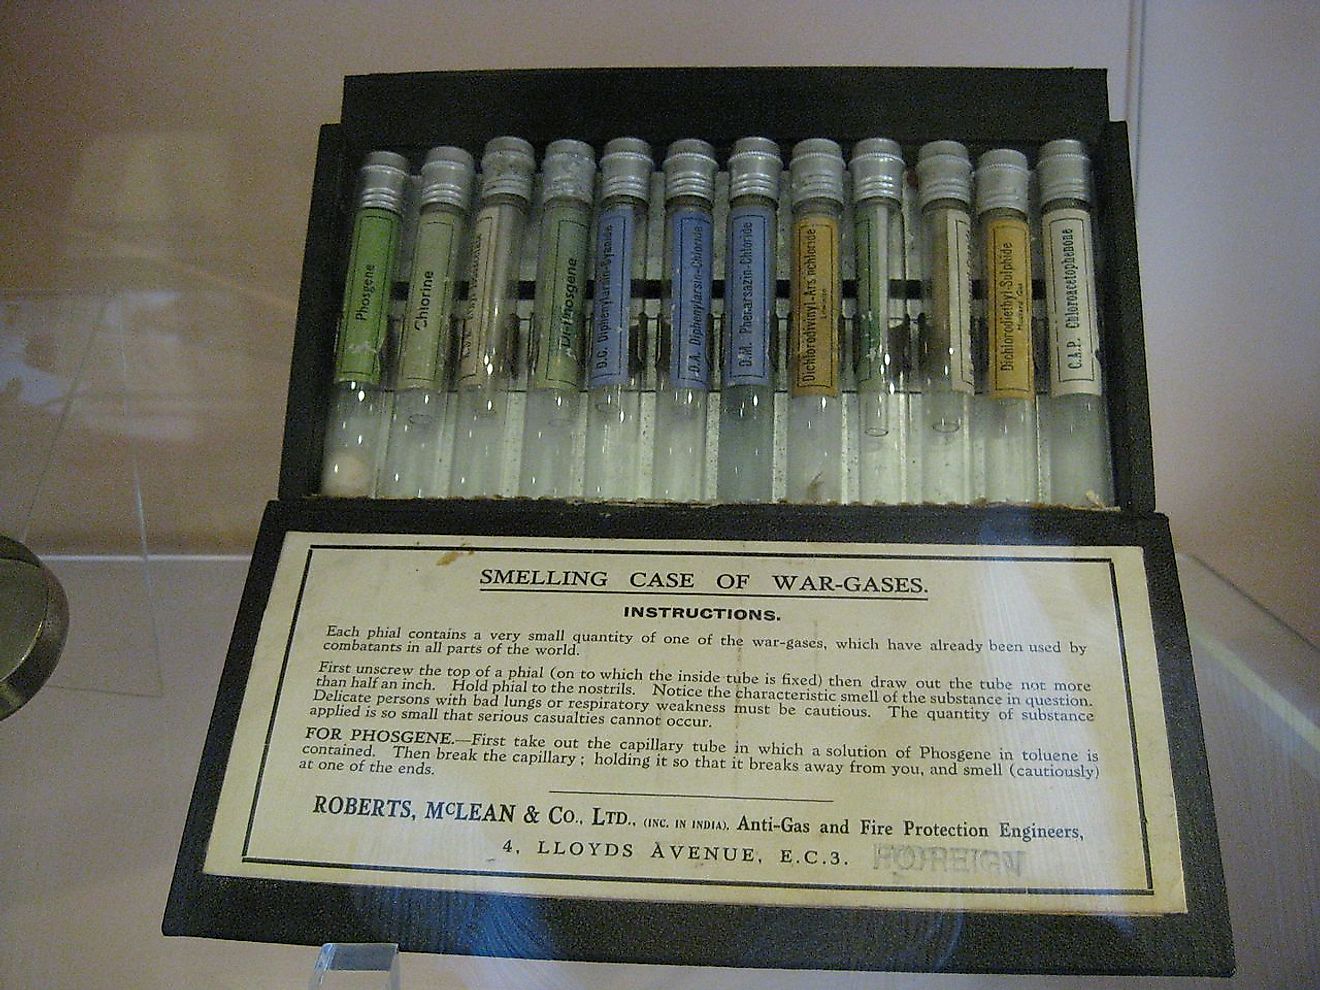 A Smelling Case to allow officers to identify the gas by smell and thus act appropriately for protection and treatment. Image credit: Chemical Engineer/Wikimedia.org